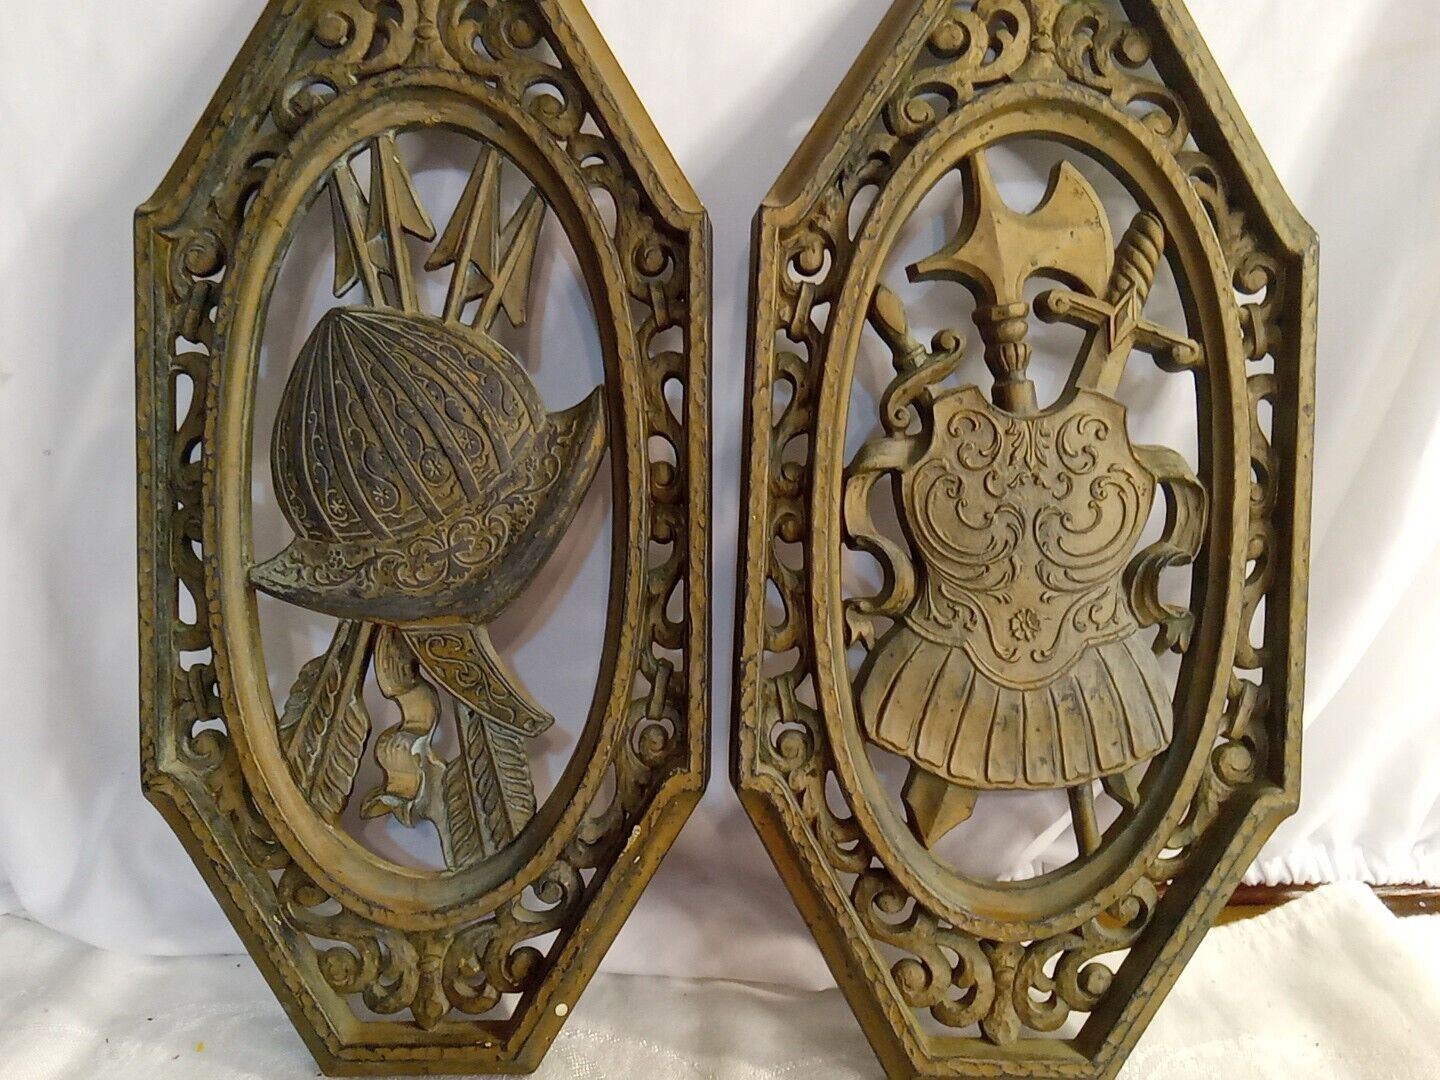 Vintage 70s Homco SYROCO MEDIEVAL COAT OF ARMS 2 Wall Plaques #7103 and #7105